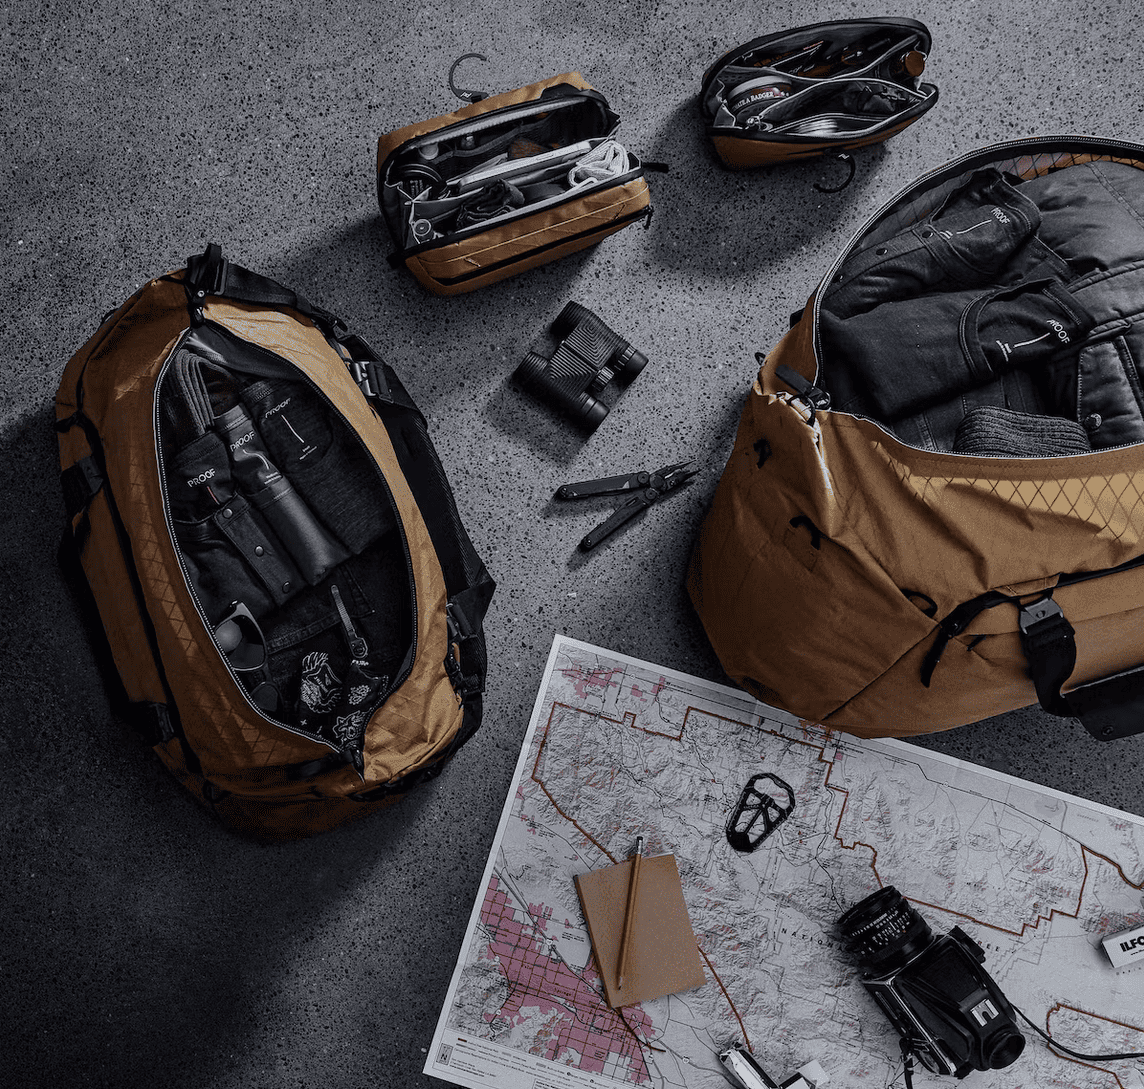 Watches, Stories, & Gear: Huckberry and Peak Design Upgrade Travel Bag Collection with X-Pac, Kristin Harila Completes 14 Peaks Challenge in Record-Breaking Fashion, Polar Pro’s Slate II Memory Card Case, & More